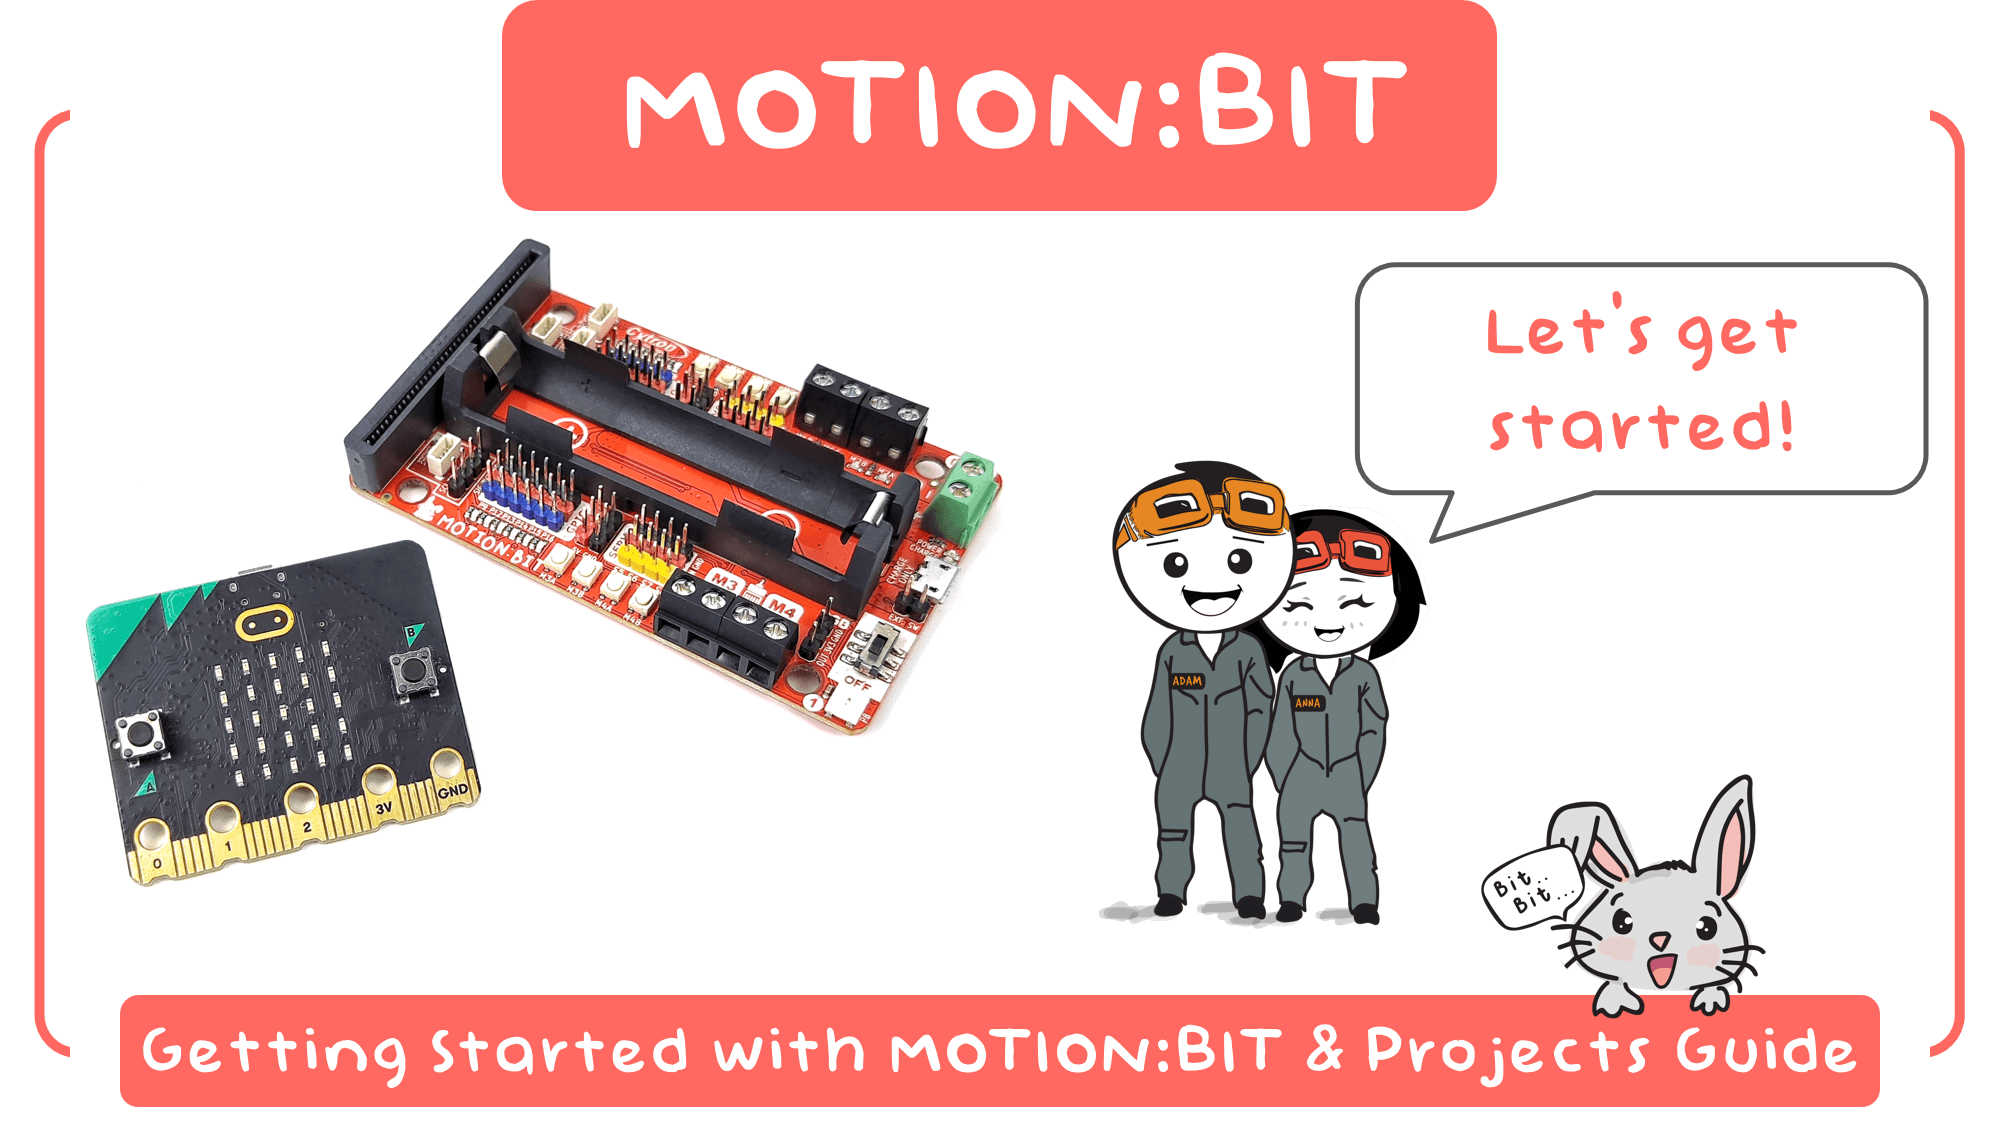 Getting Started with MOTION:BIT & Projects Guide